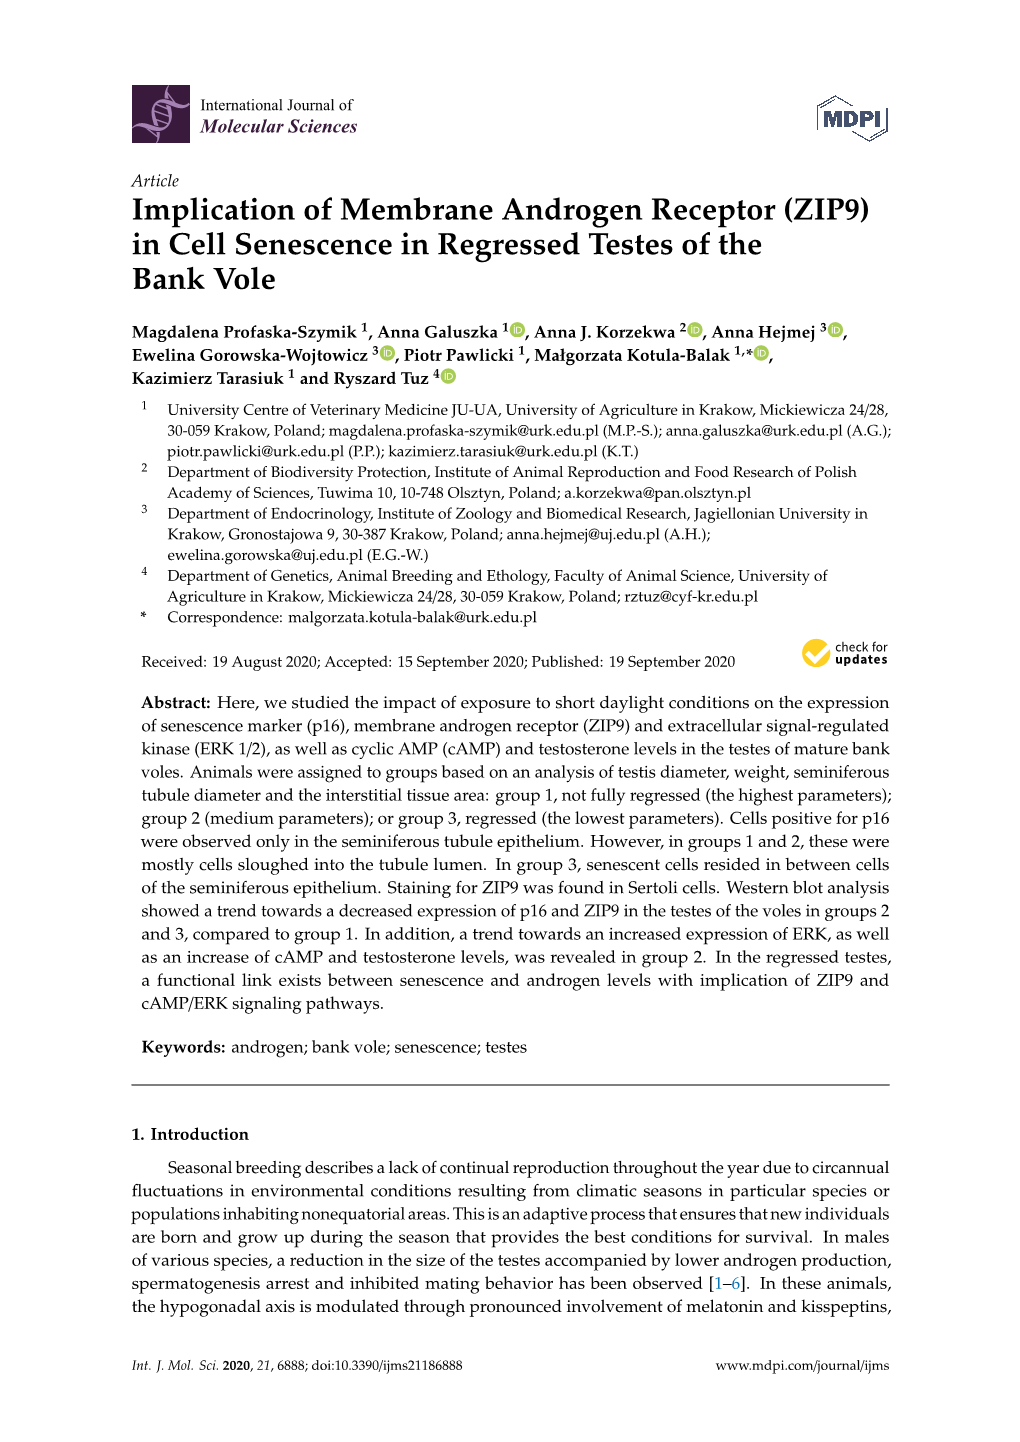 Implication of Membrane Androgen Receptor (ZIP9) in Cell Senescence in Regressed Testes of the Bank Vole